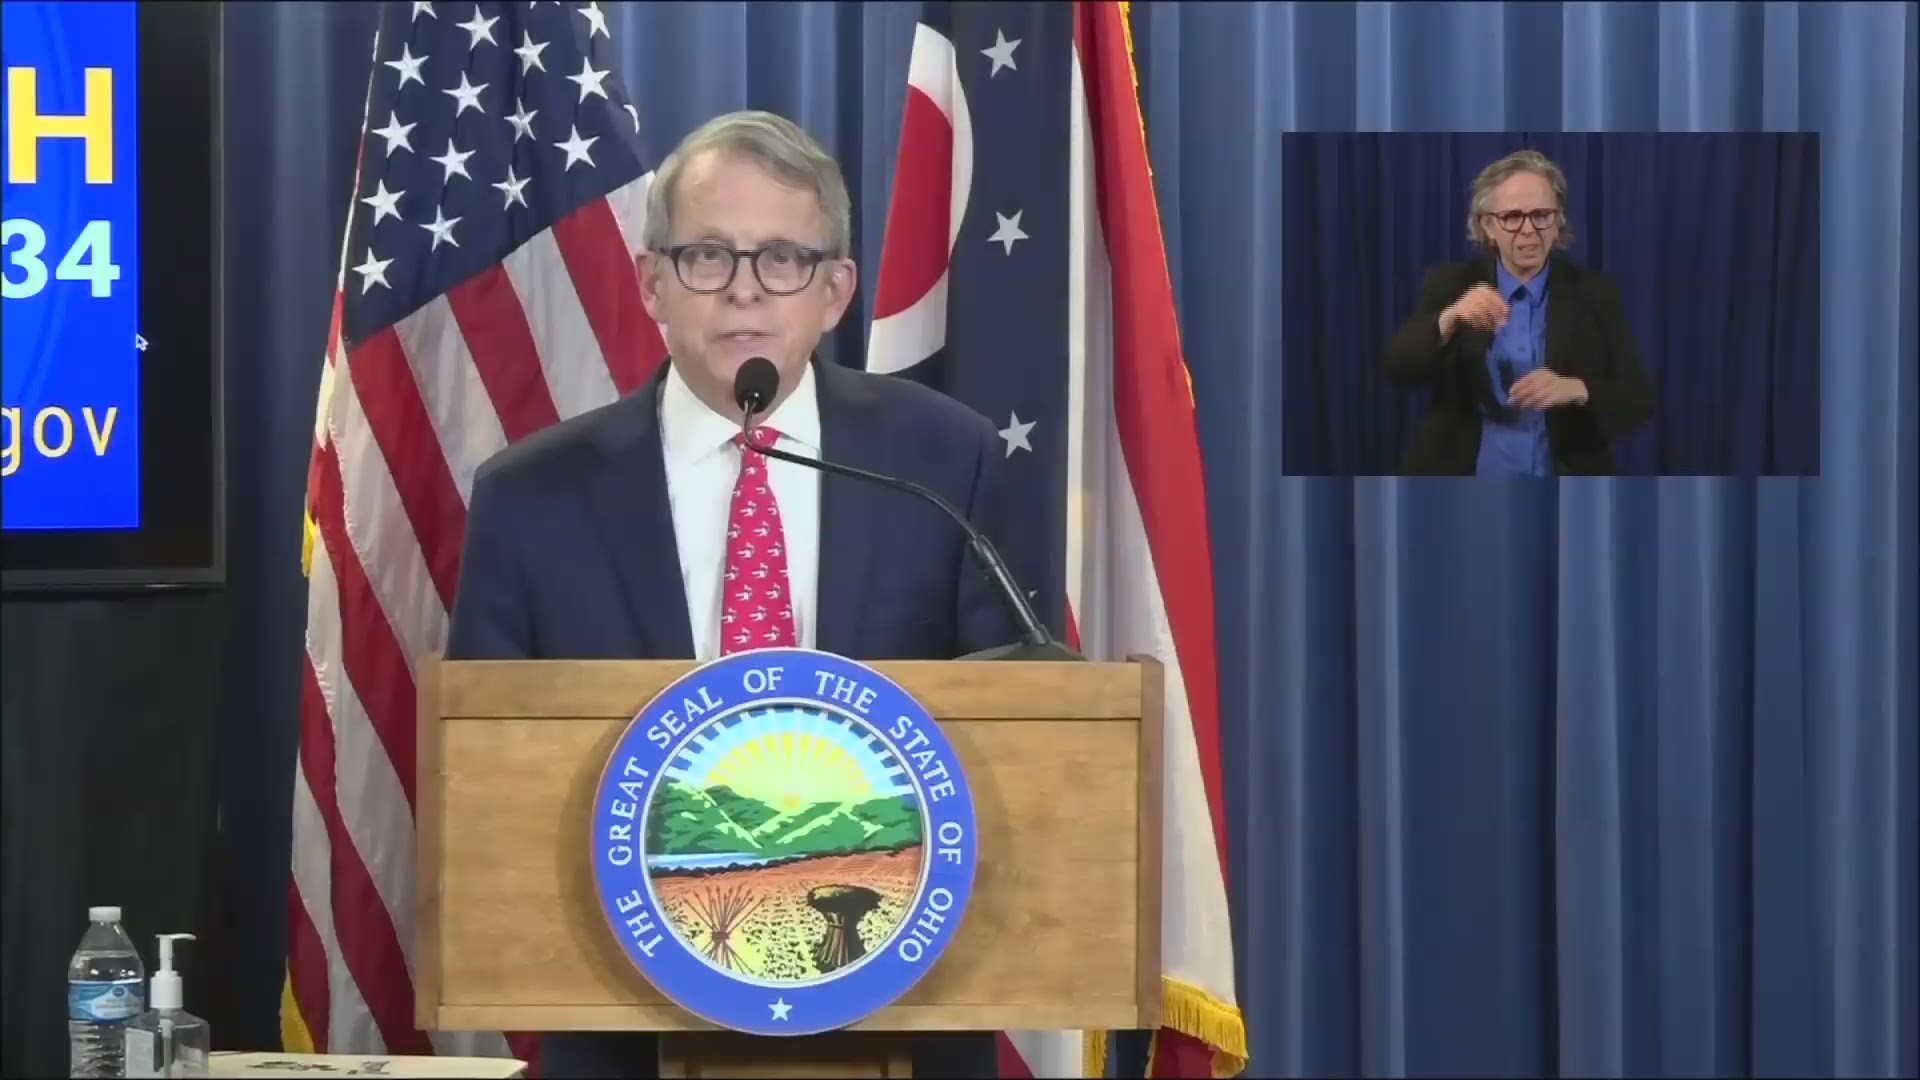 Ohio Governor Mike DeWine said on Tuesday that wearing facial coverings will be recommended, not mandated as previously planned as the state's economy reopens.